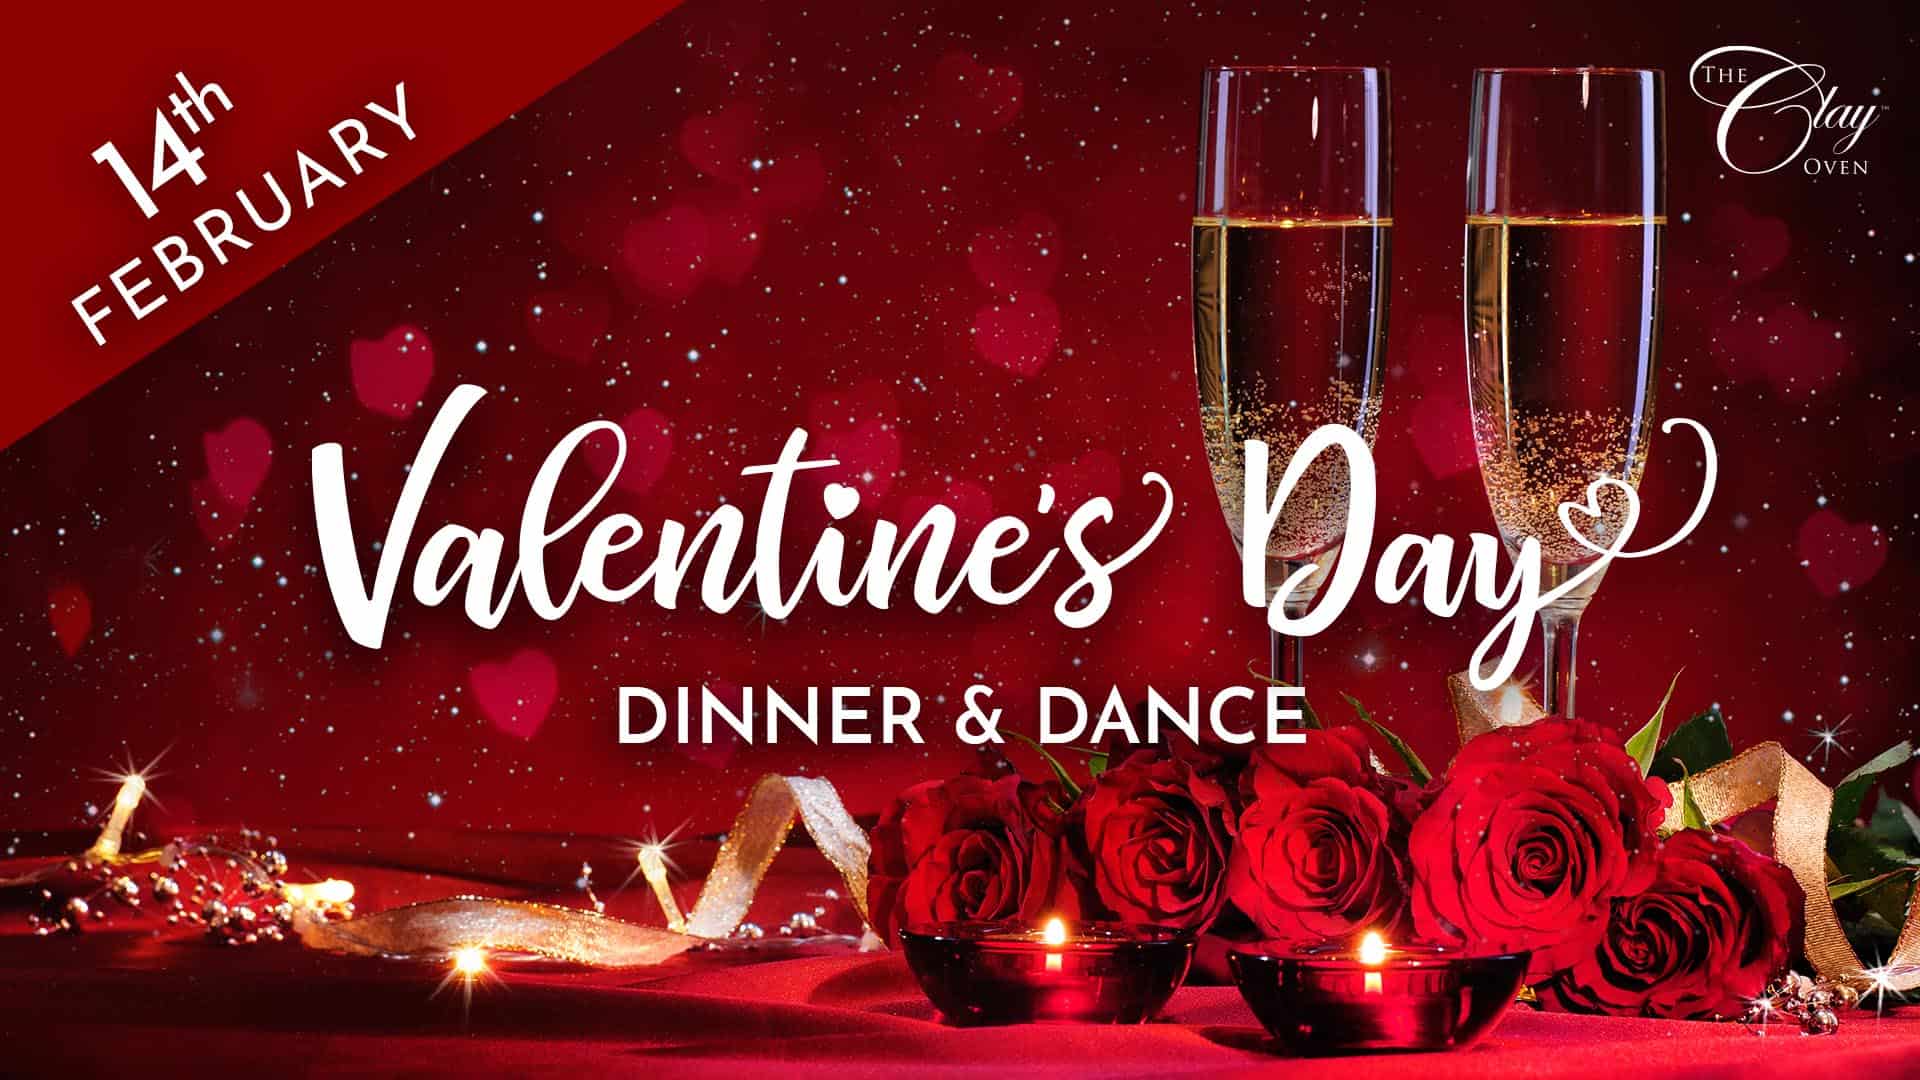 Valentine's Day dinner and dance.